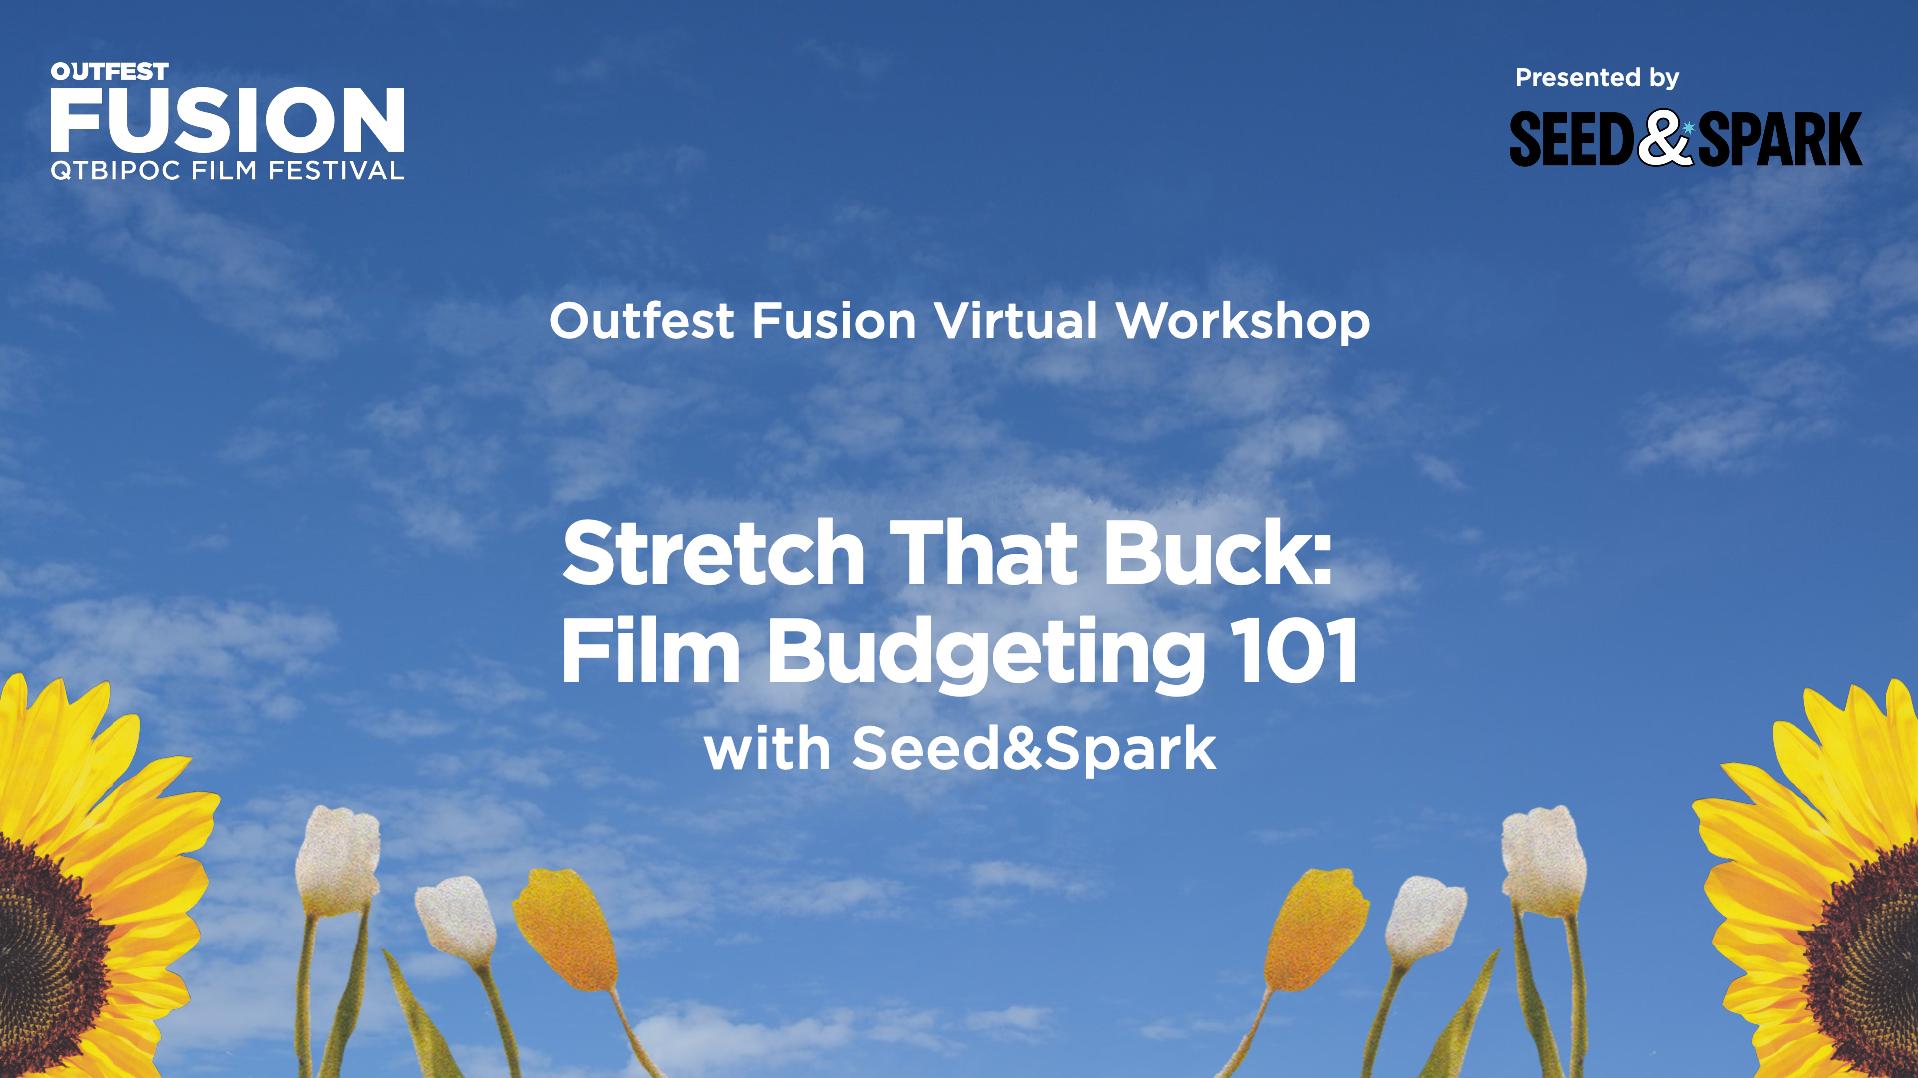 Stretch That Buck: Film Budgeting 101 with Seed&Spark